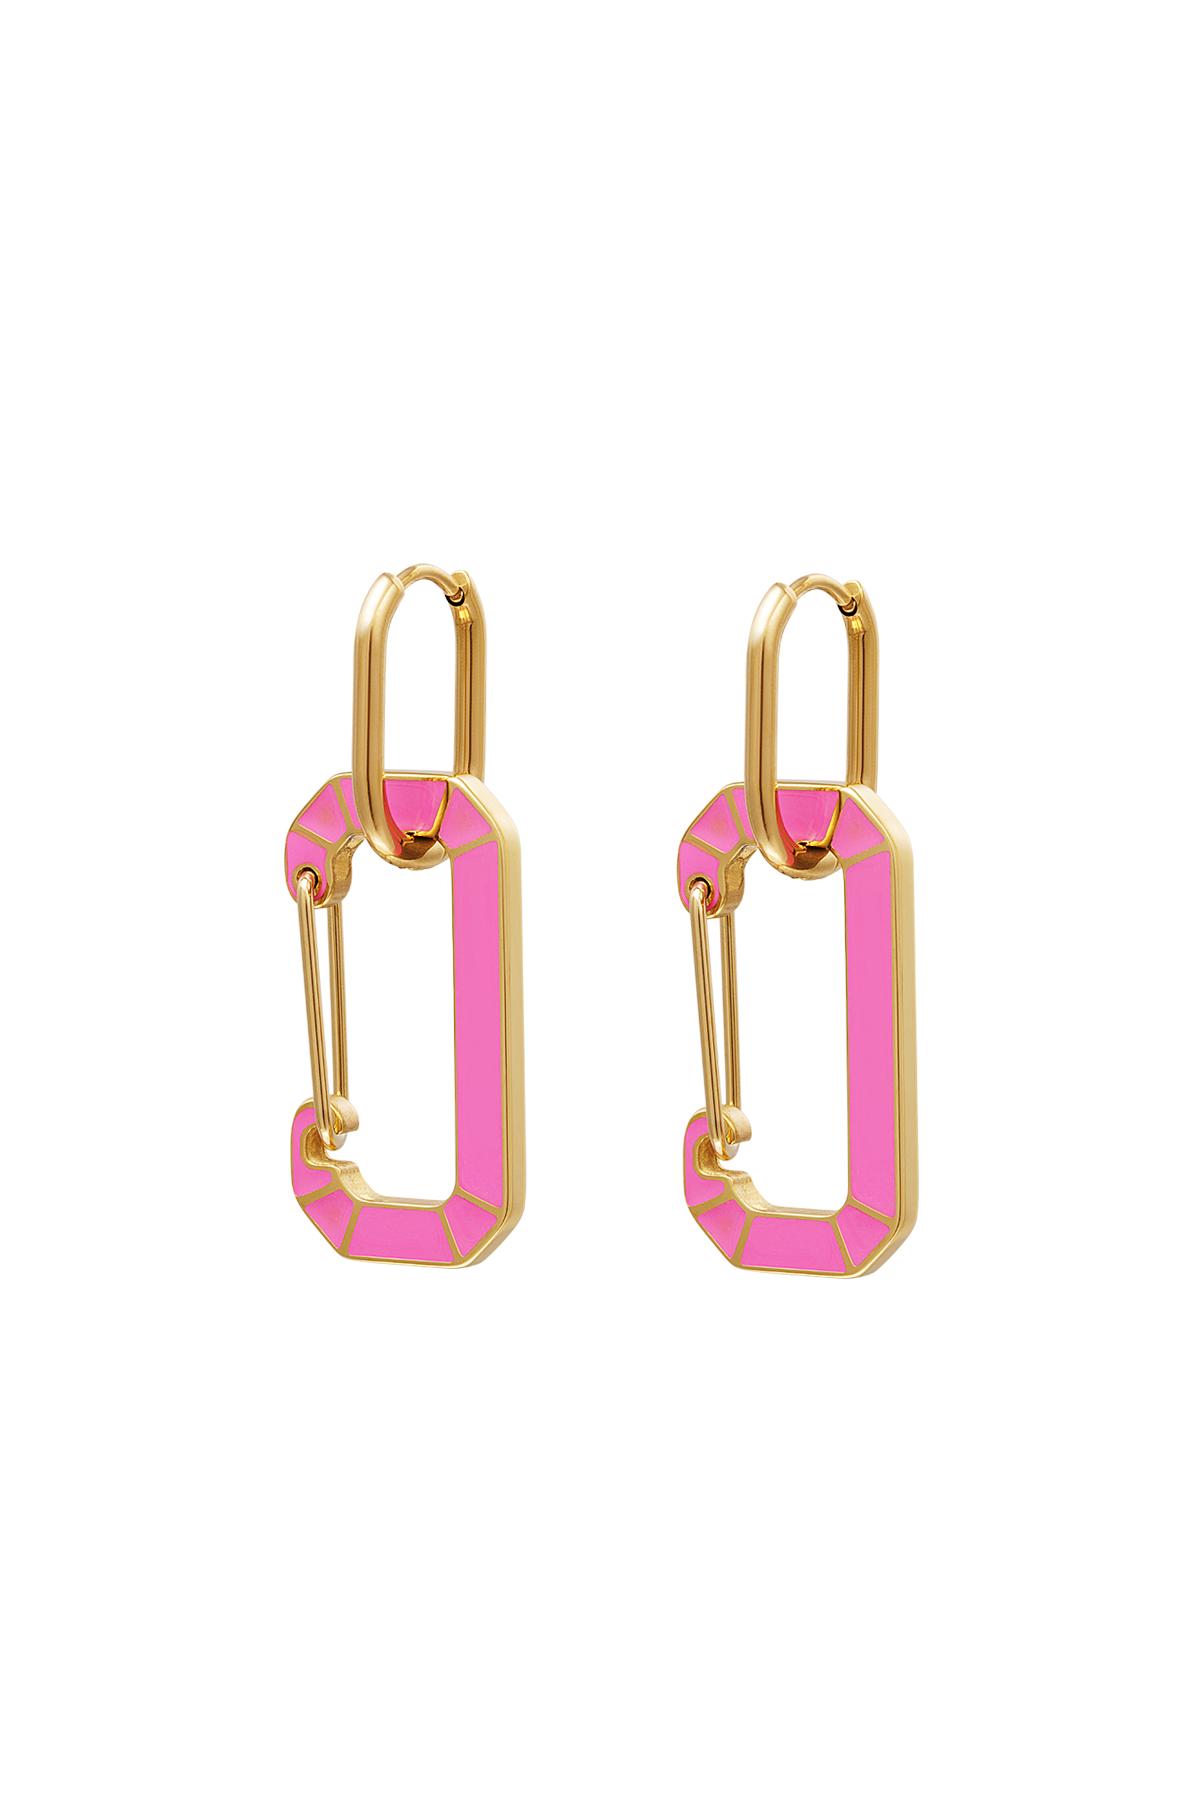 Stainless steel earrings with link charm Pink &amp; Gold